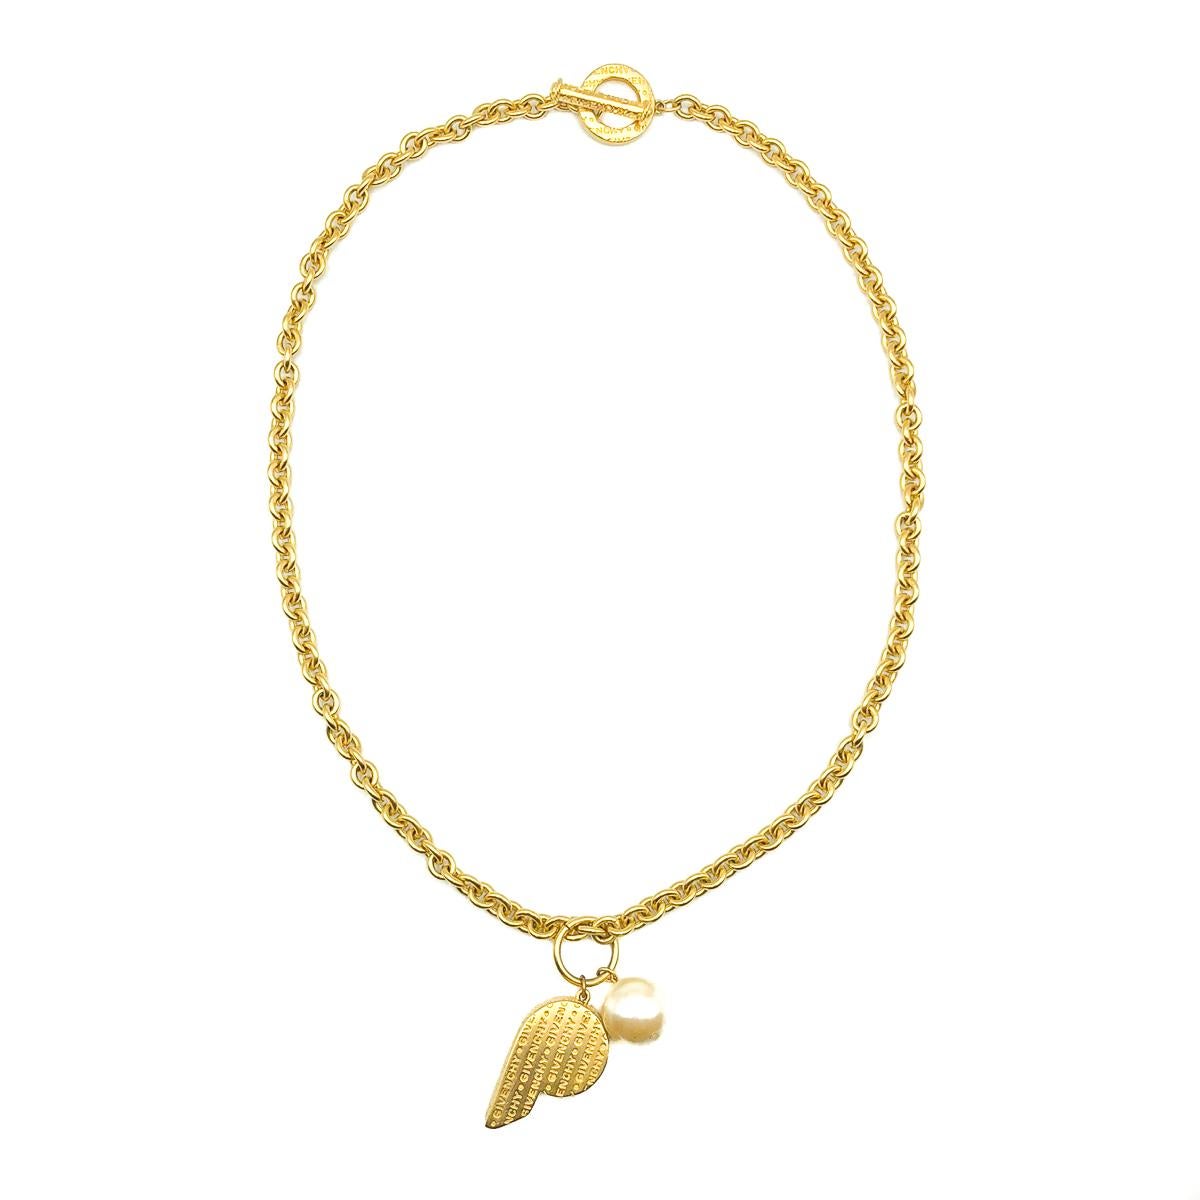 A spectacular Vintage Givenchy Whistle Necklace. Most at home on the catwalks of the 1990s. Crafted in extremely high quality gold plated metal with simulated pearl. A weighty large link chain is finished with an oversized monogrammed toggle